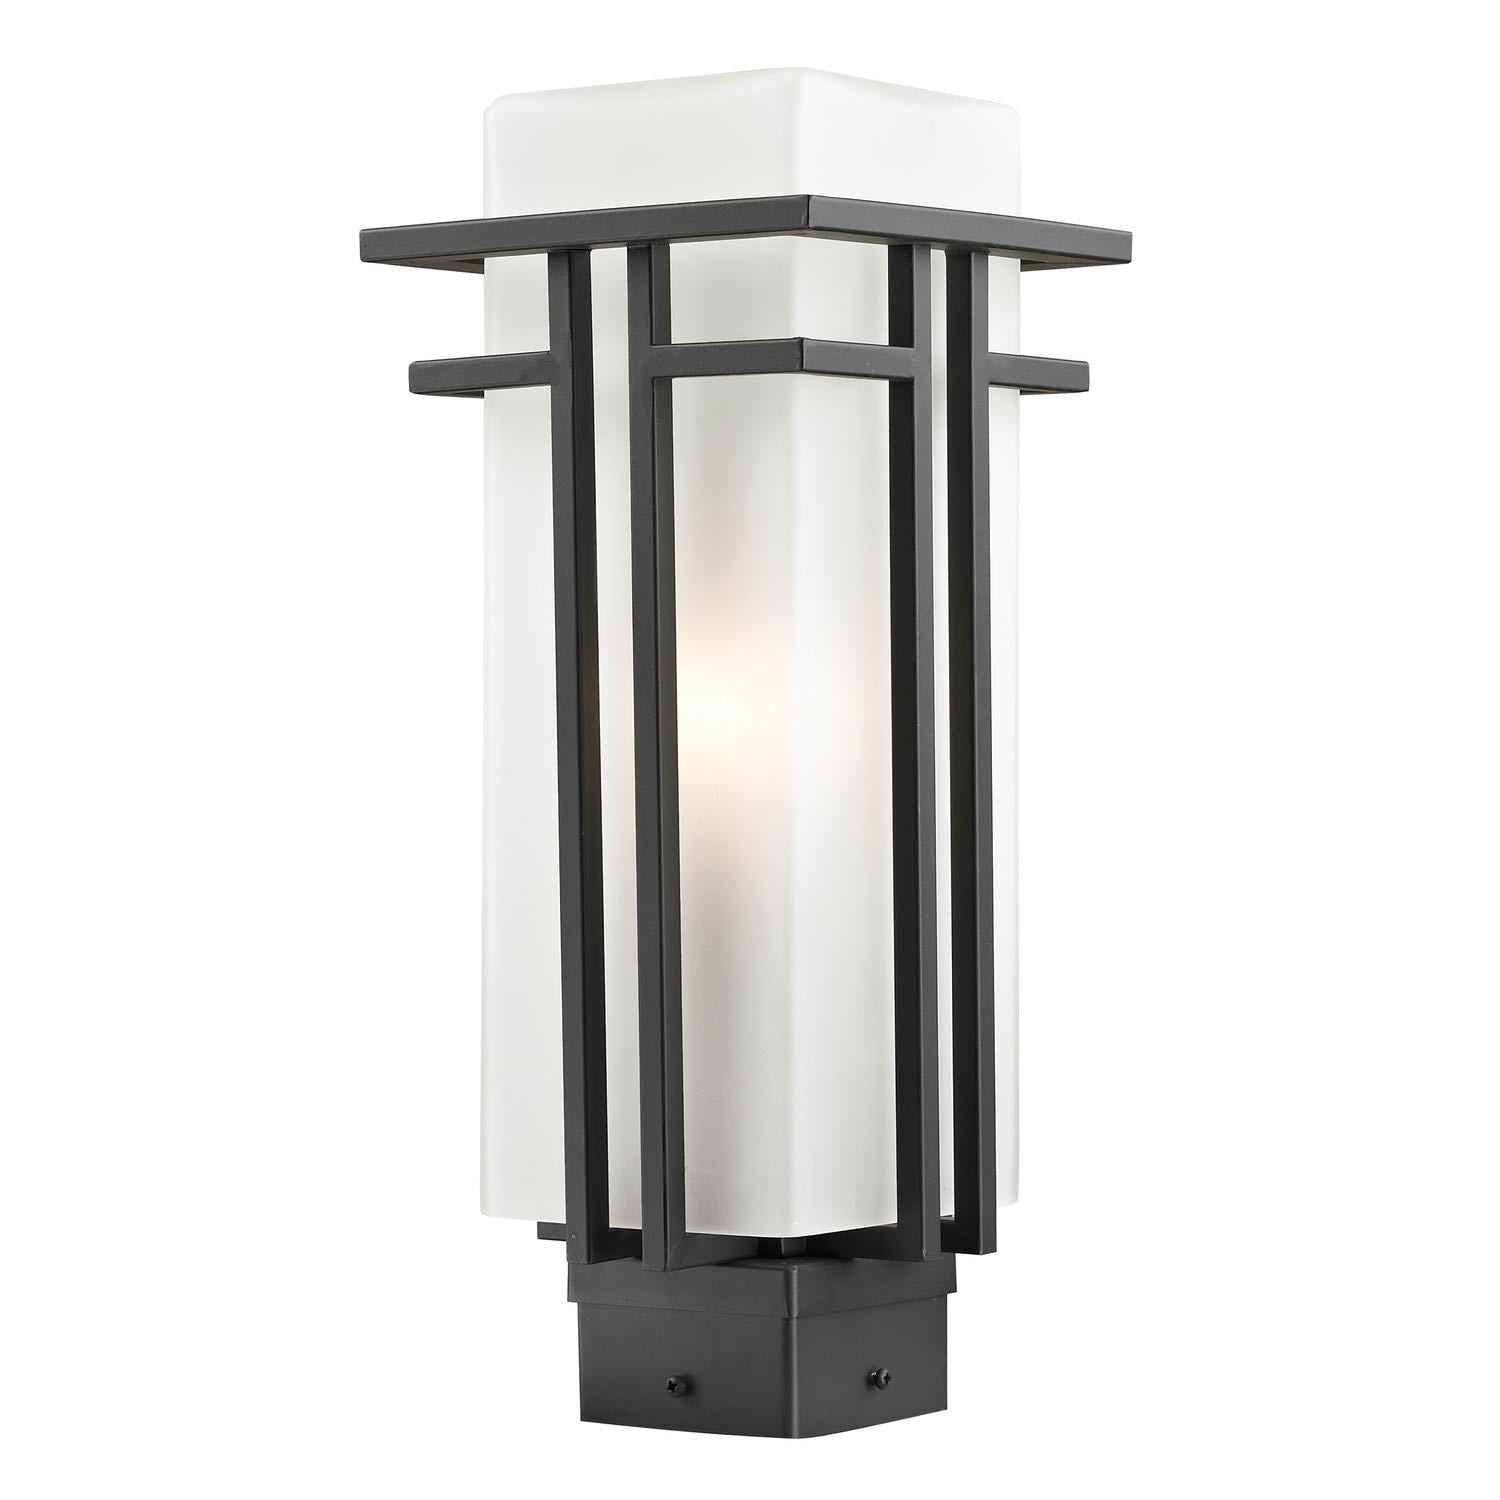 Abbey Post Light Outdoor Rubbed Bronze